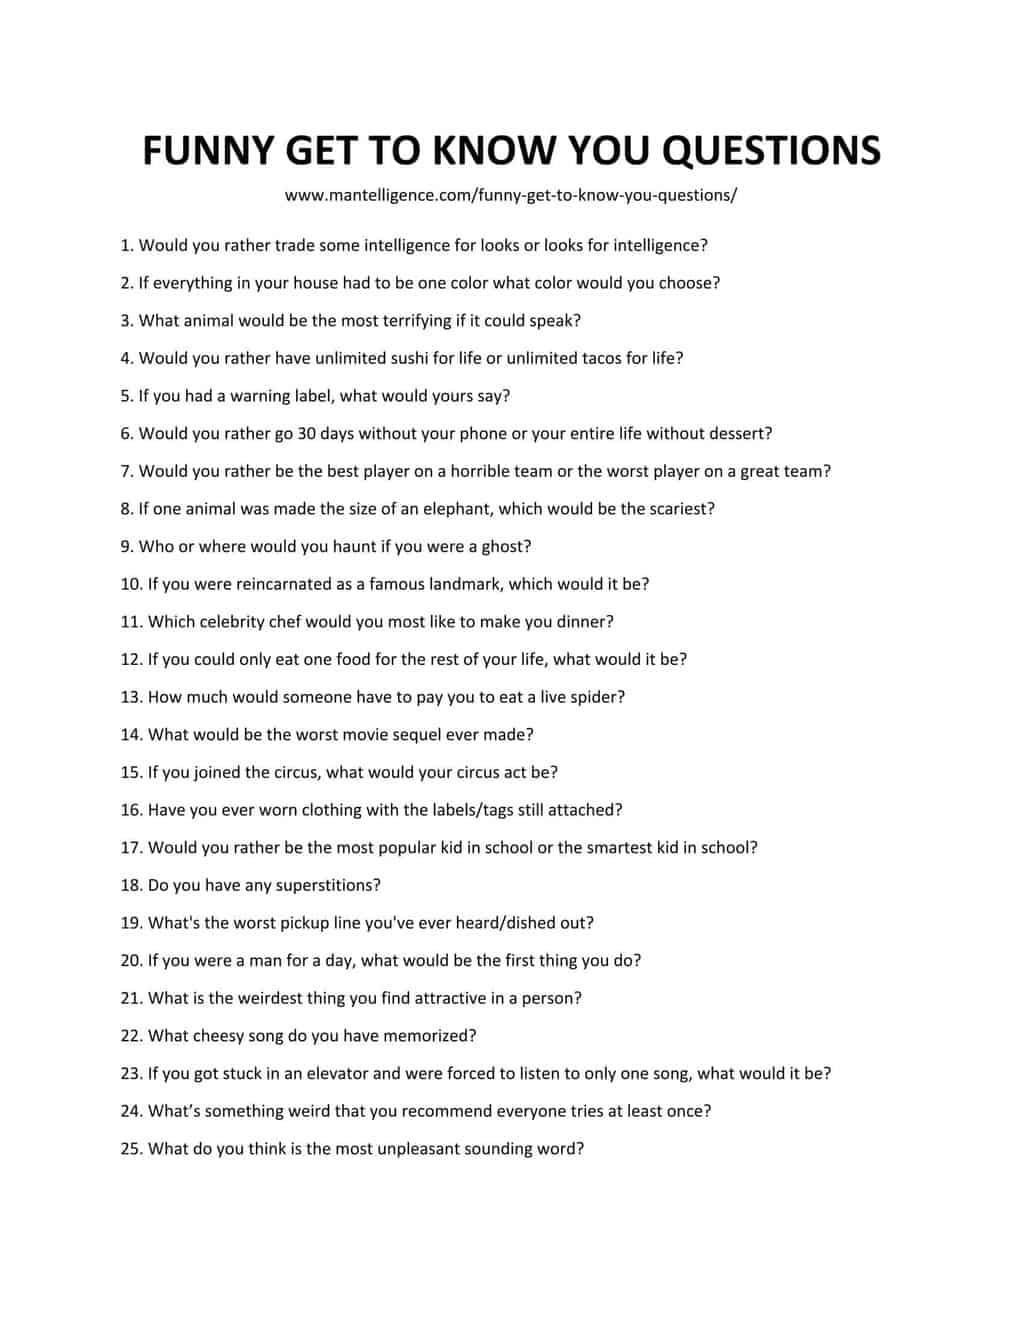 109+ Funny Get to Know You Questions (For: Guys, Girls, Couples)